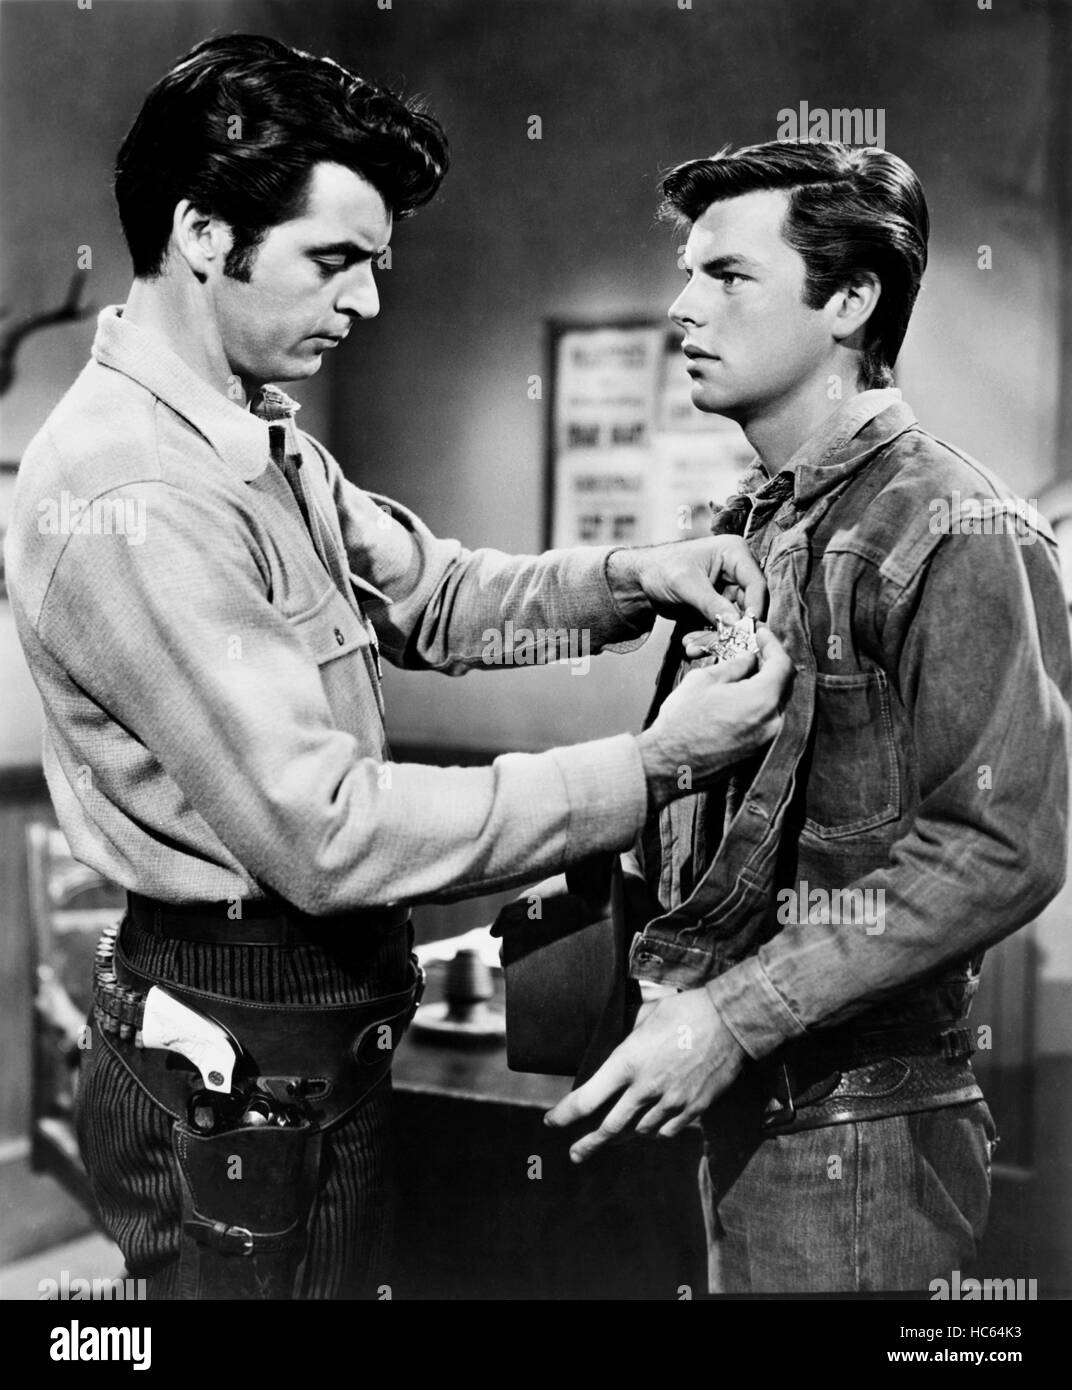 THE SILVER WHIP, from left, Rory Calhoun, Robert Wagner, 1953, TM and ...